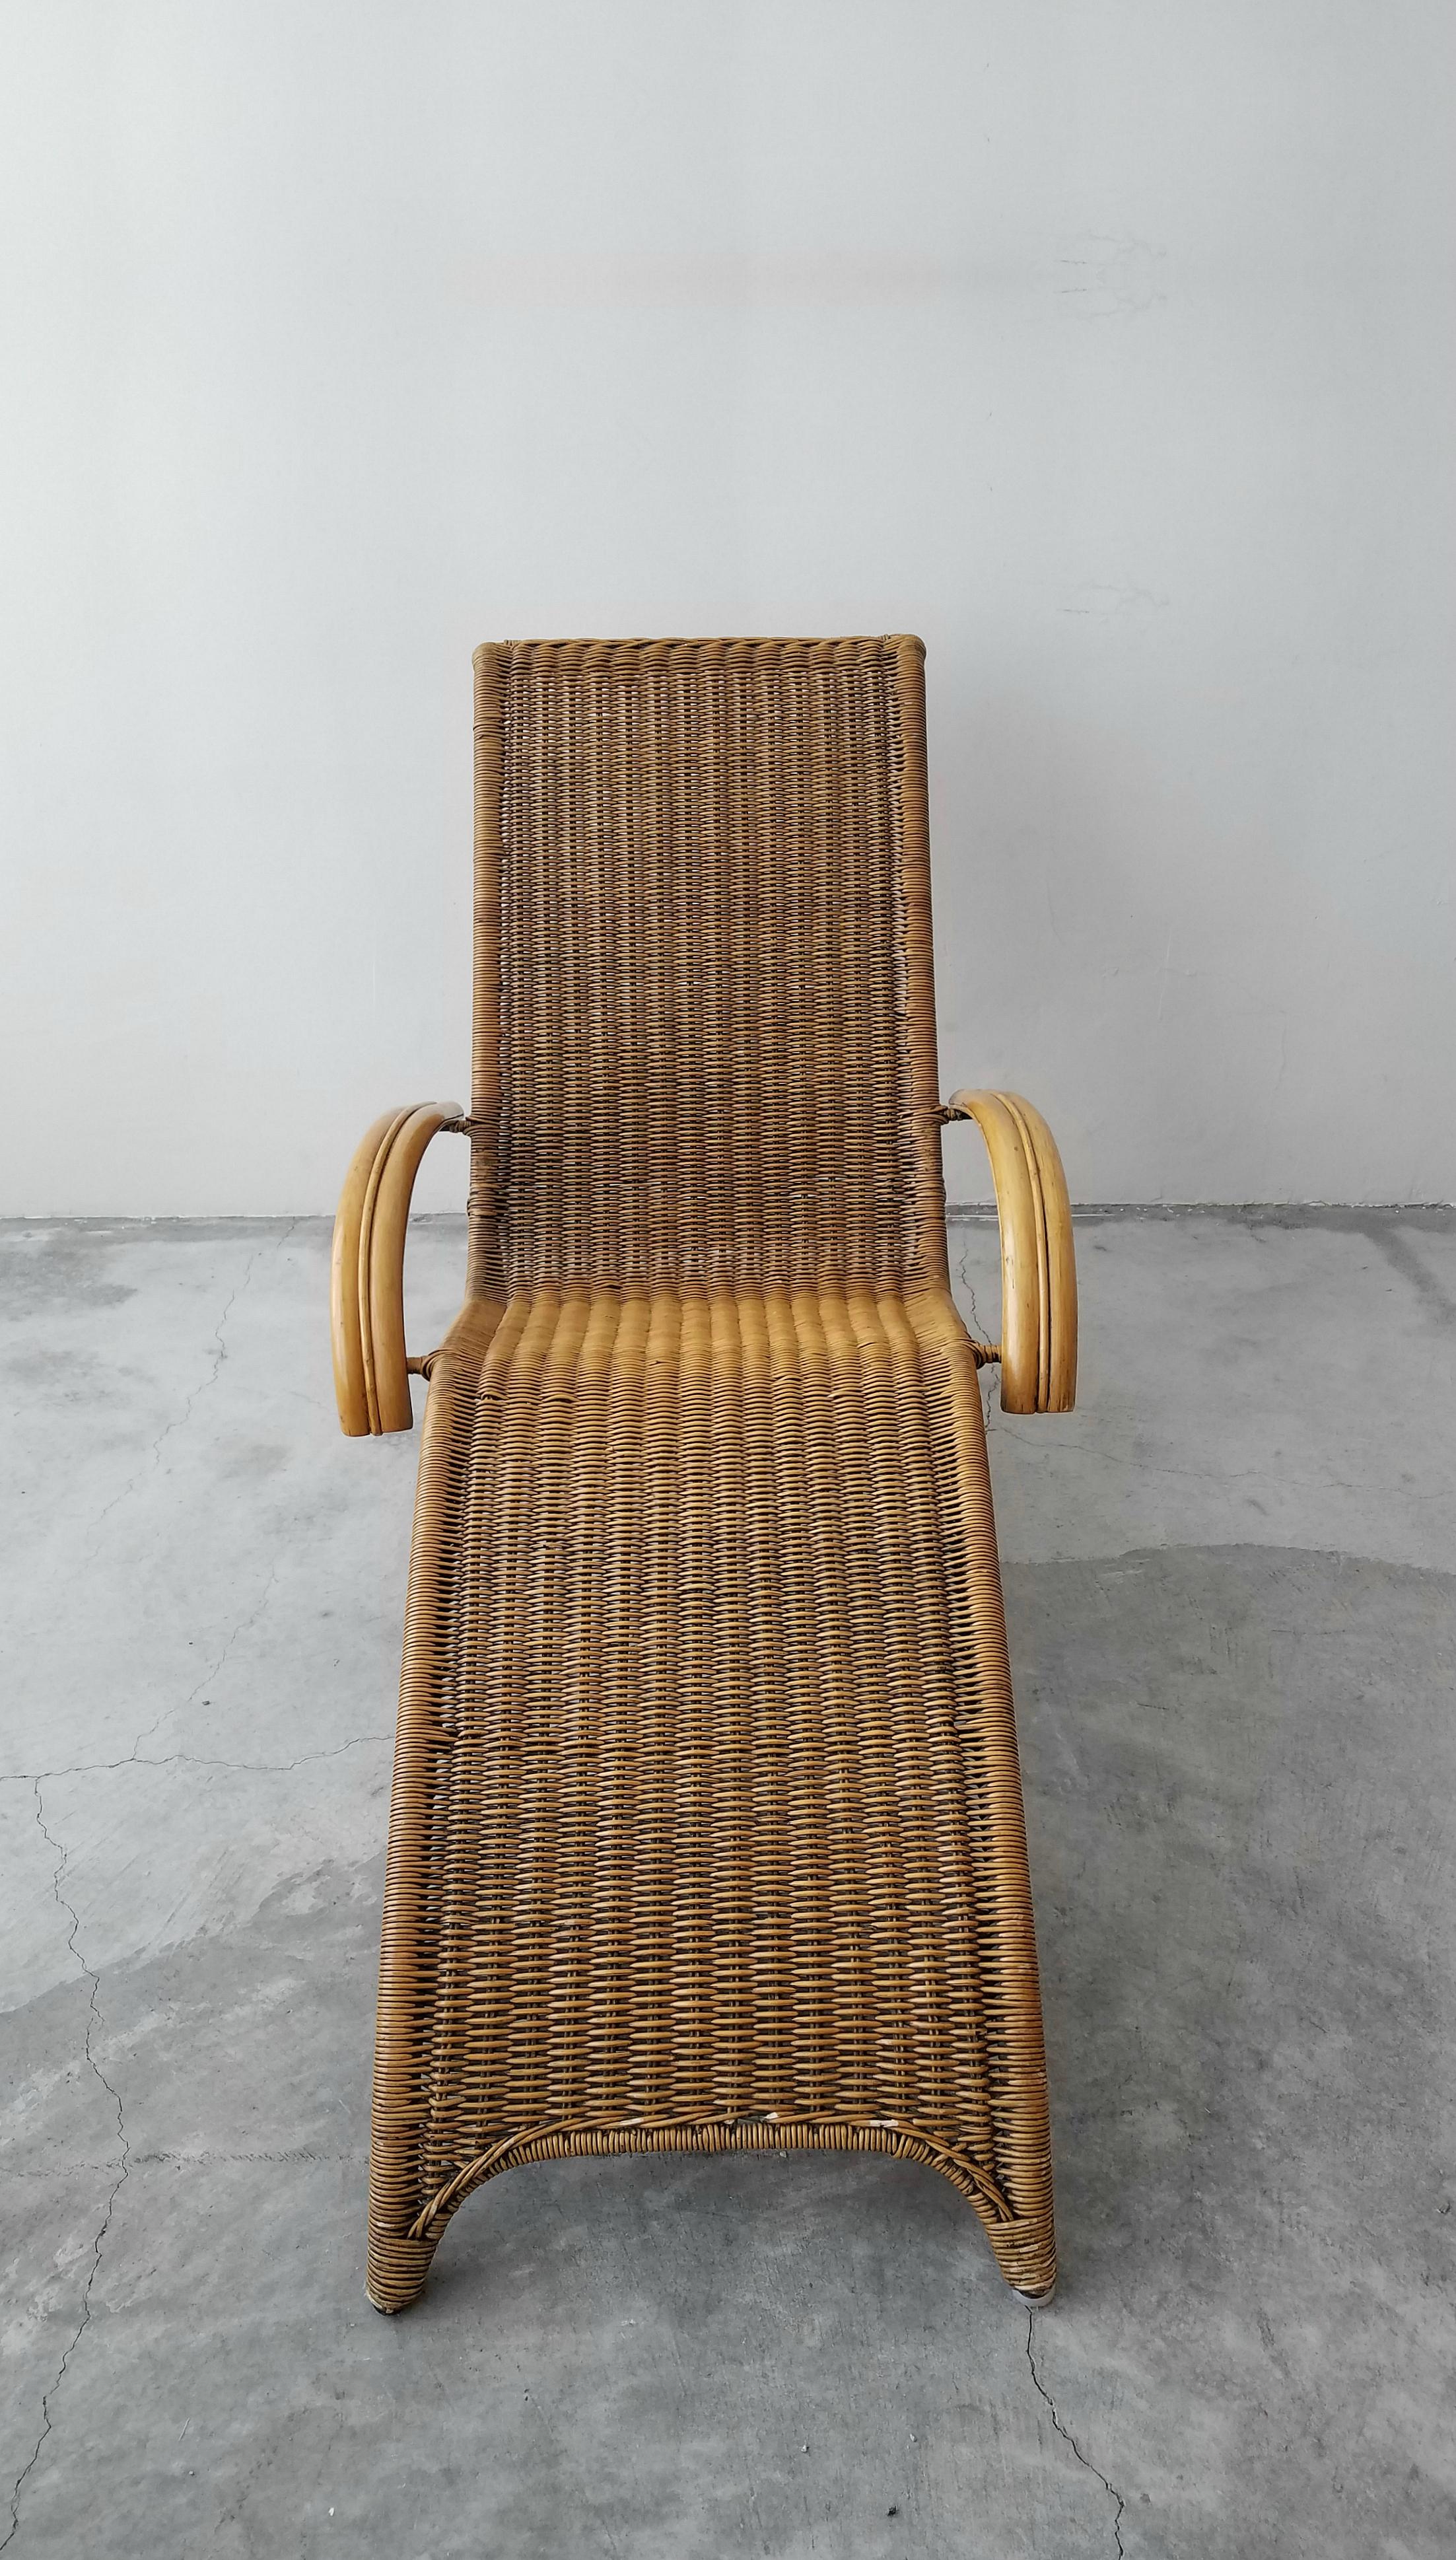 20th Century Midcentury Sculptural Italian Modern Cane and Bamboo Chaise Lounge Chair